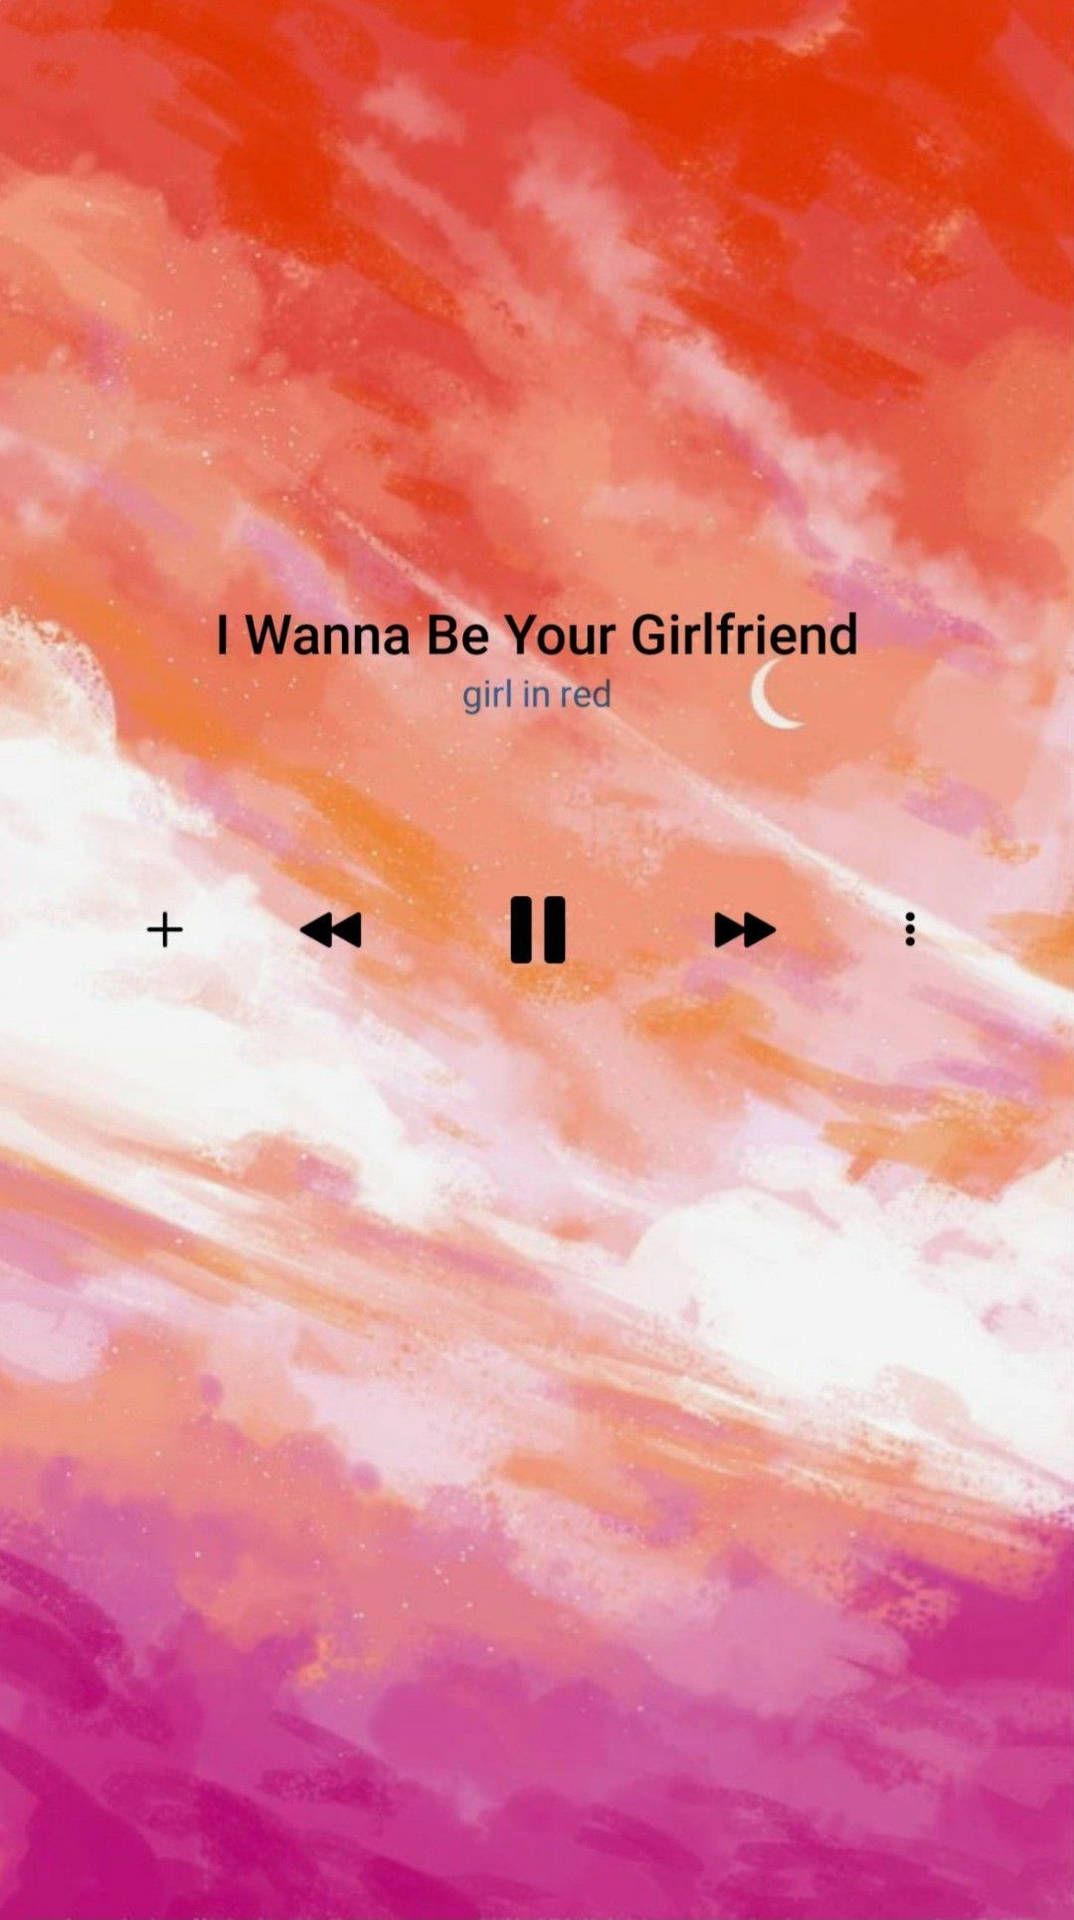 I want to be your girlfriend - Art, gay, LGBT, non binary